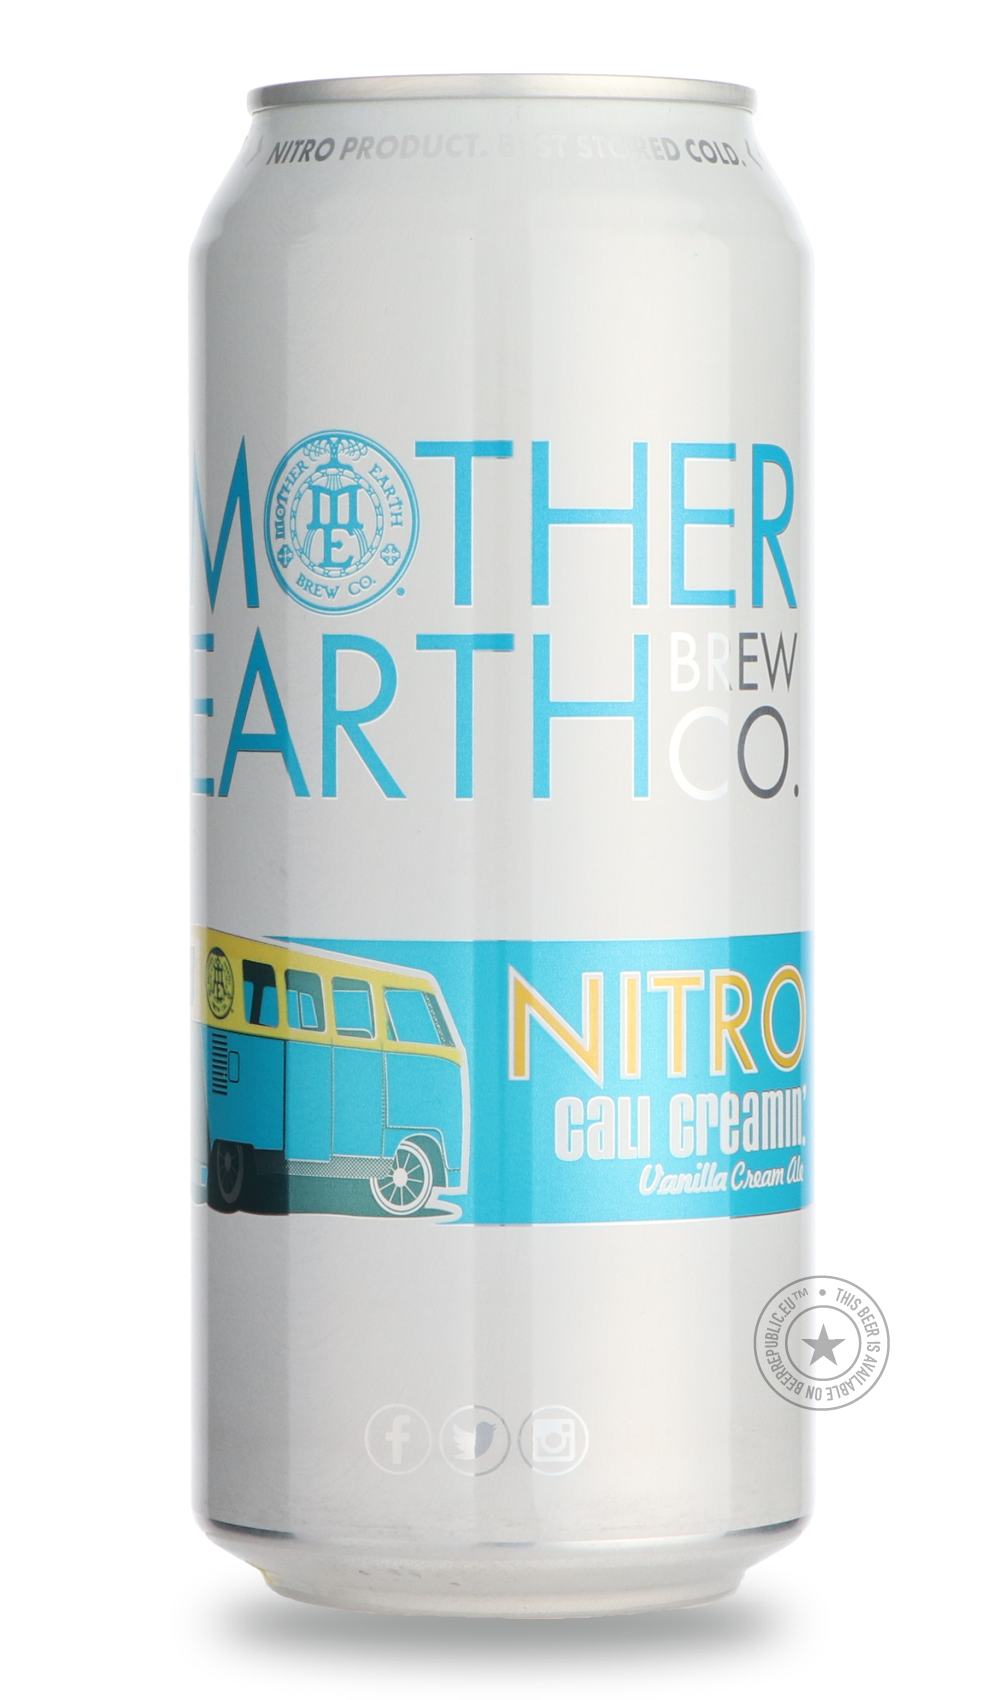 -Mother Earth- Nitro Cali Creamin'-Pale- Only @ Beer Republic - The best online beer store for American & Canadian craft beer - Buy beer online from the USA and Canada - Bier online kopen - Amerikaans bier kopen - Craft beer store - Craft beer kopen - Amerikanisch bier kaufen - Bier online kaufen - Acheter biere online - IPA - Stout - Porter - New England IPA - Hazy IPA - Imperial Stout - Barrel Aged - Barrel Aged Imperial Stout - Brown - Dark beer - Blond - Blonde - Pilsner - Lager - Wheat - Weizen - Amber